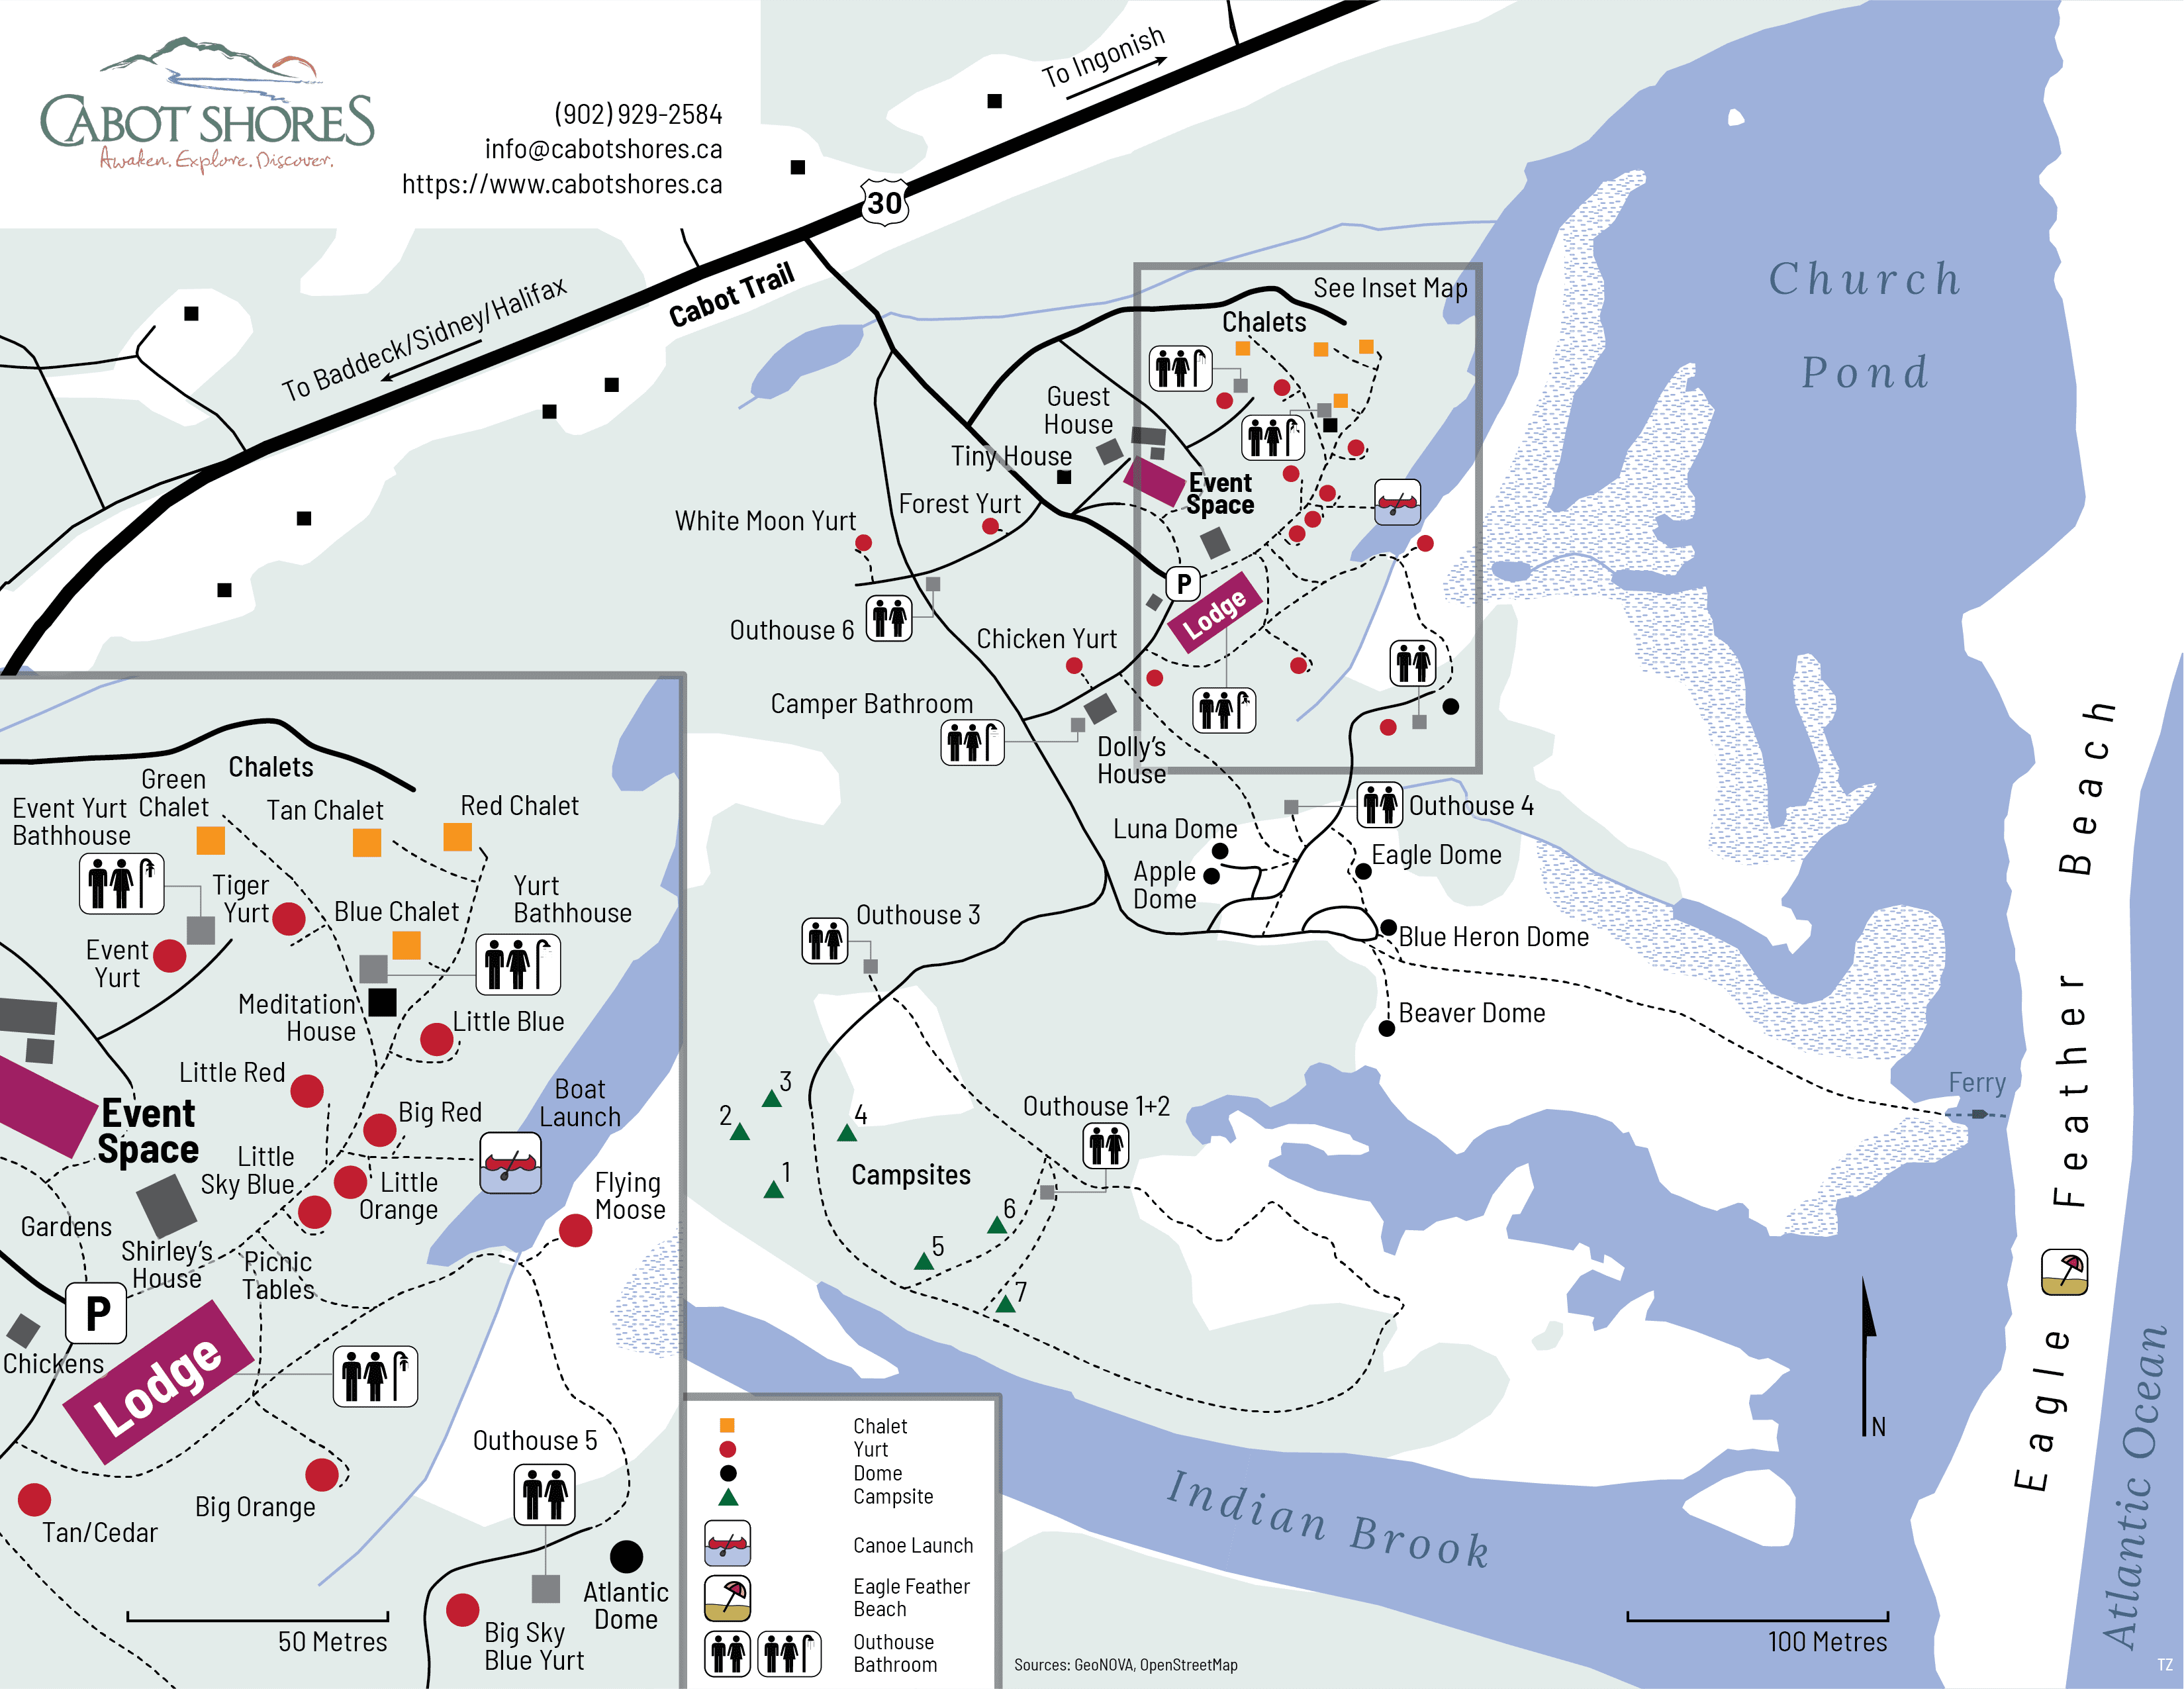 The Map of Cabot Shores